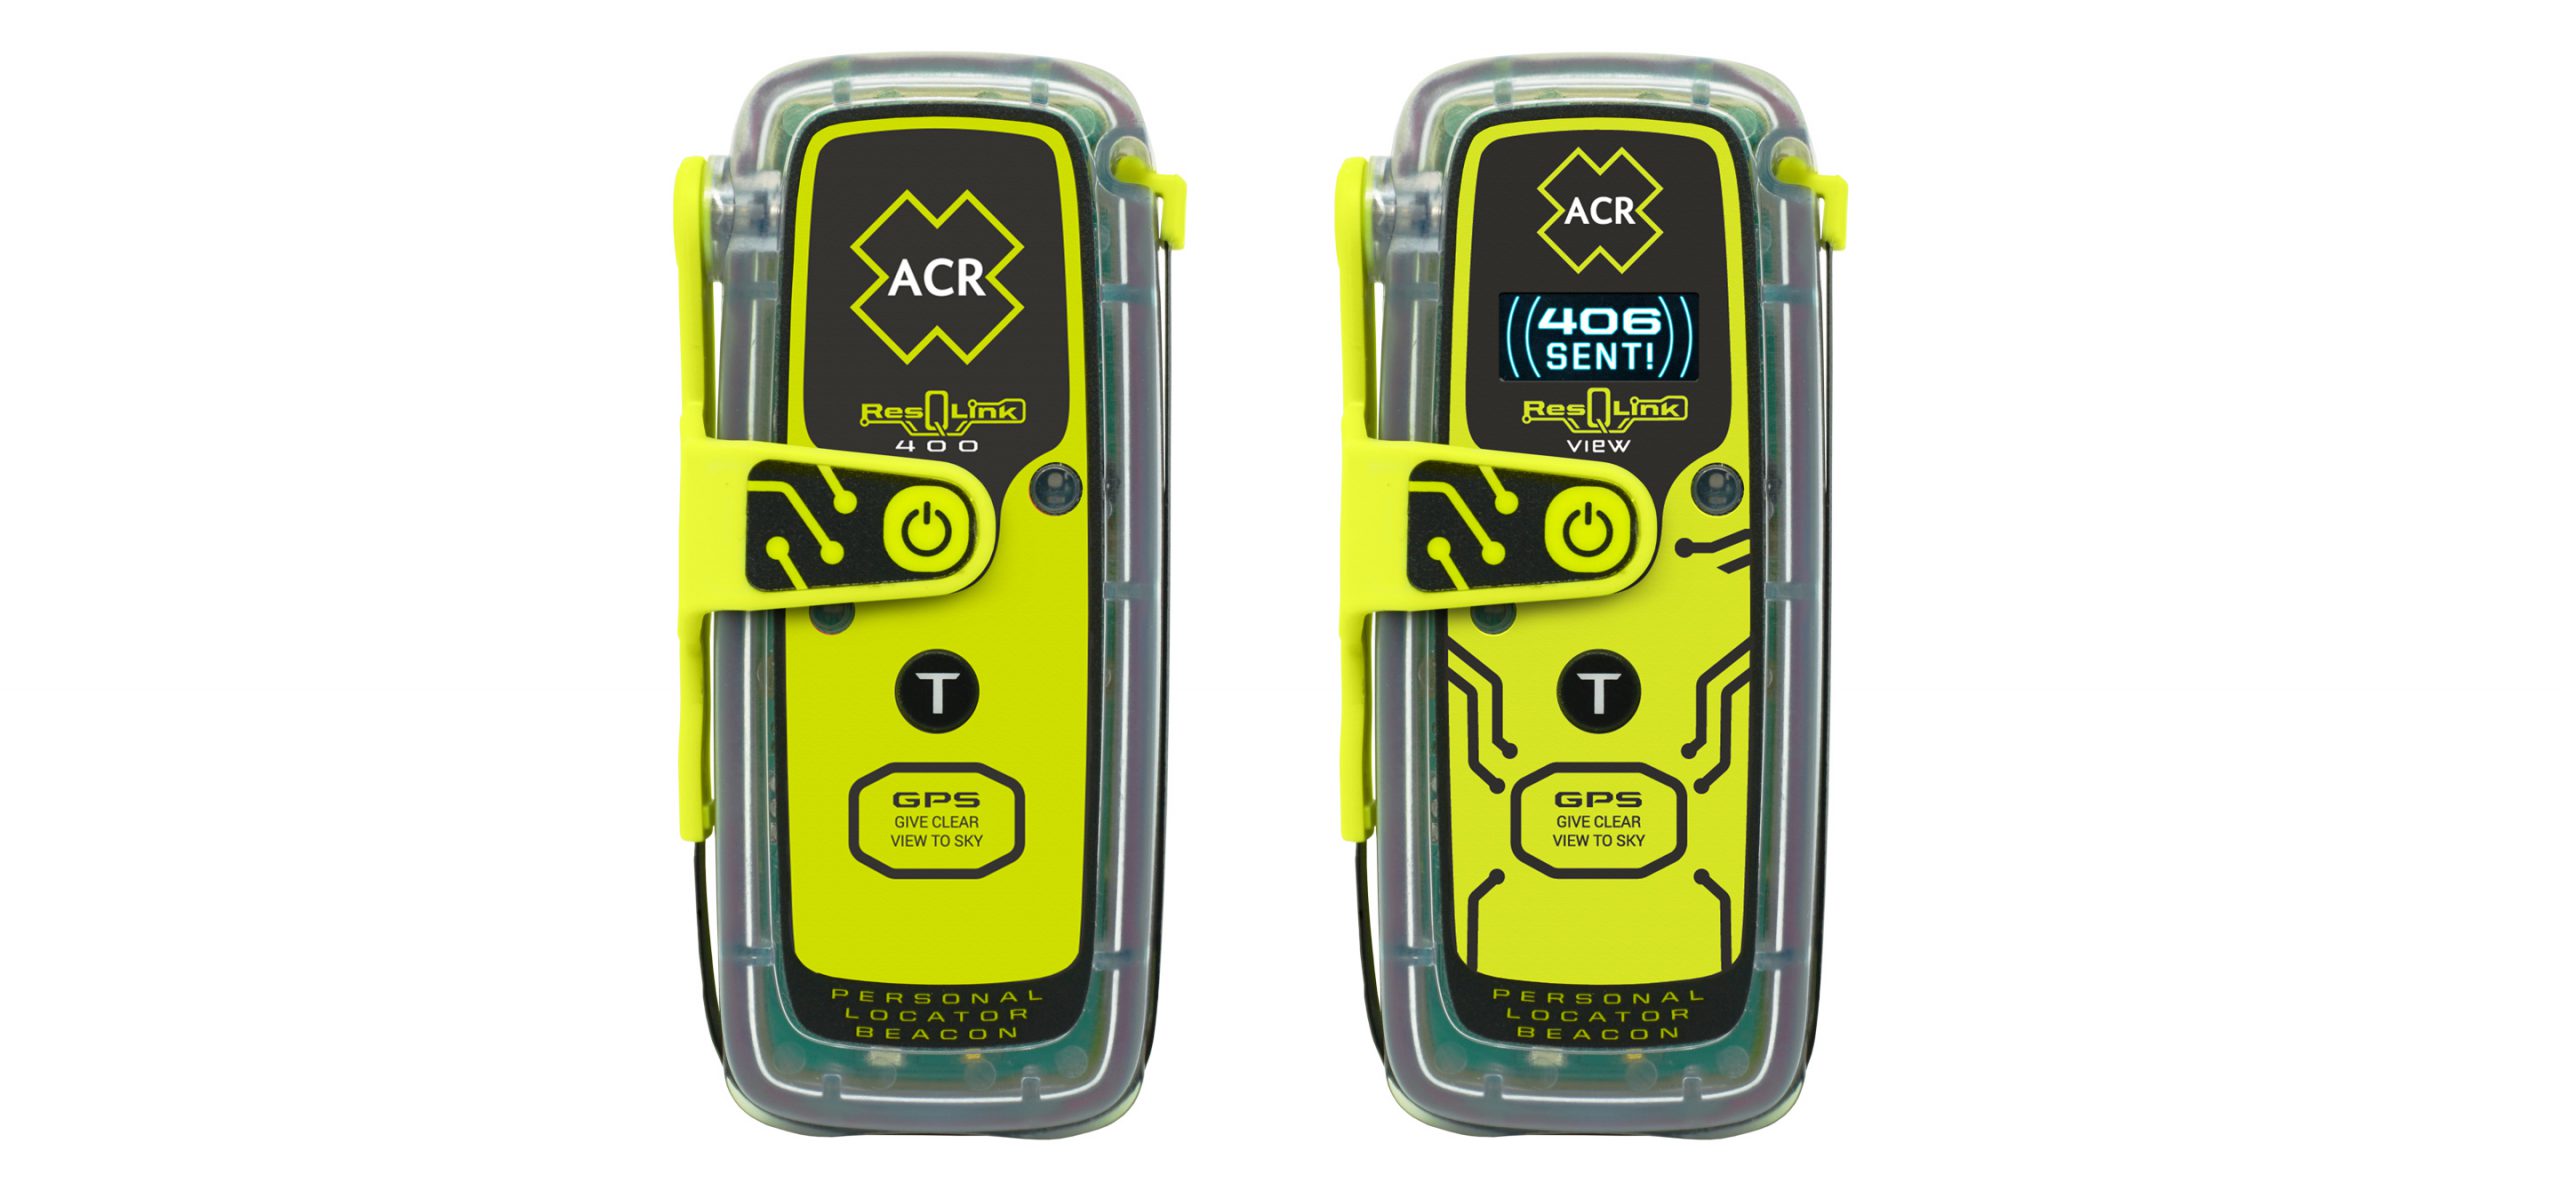 ACR Electronics Launches Next-Gen ResQLink 
Personal Locator Beacons with Digital Display Option